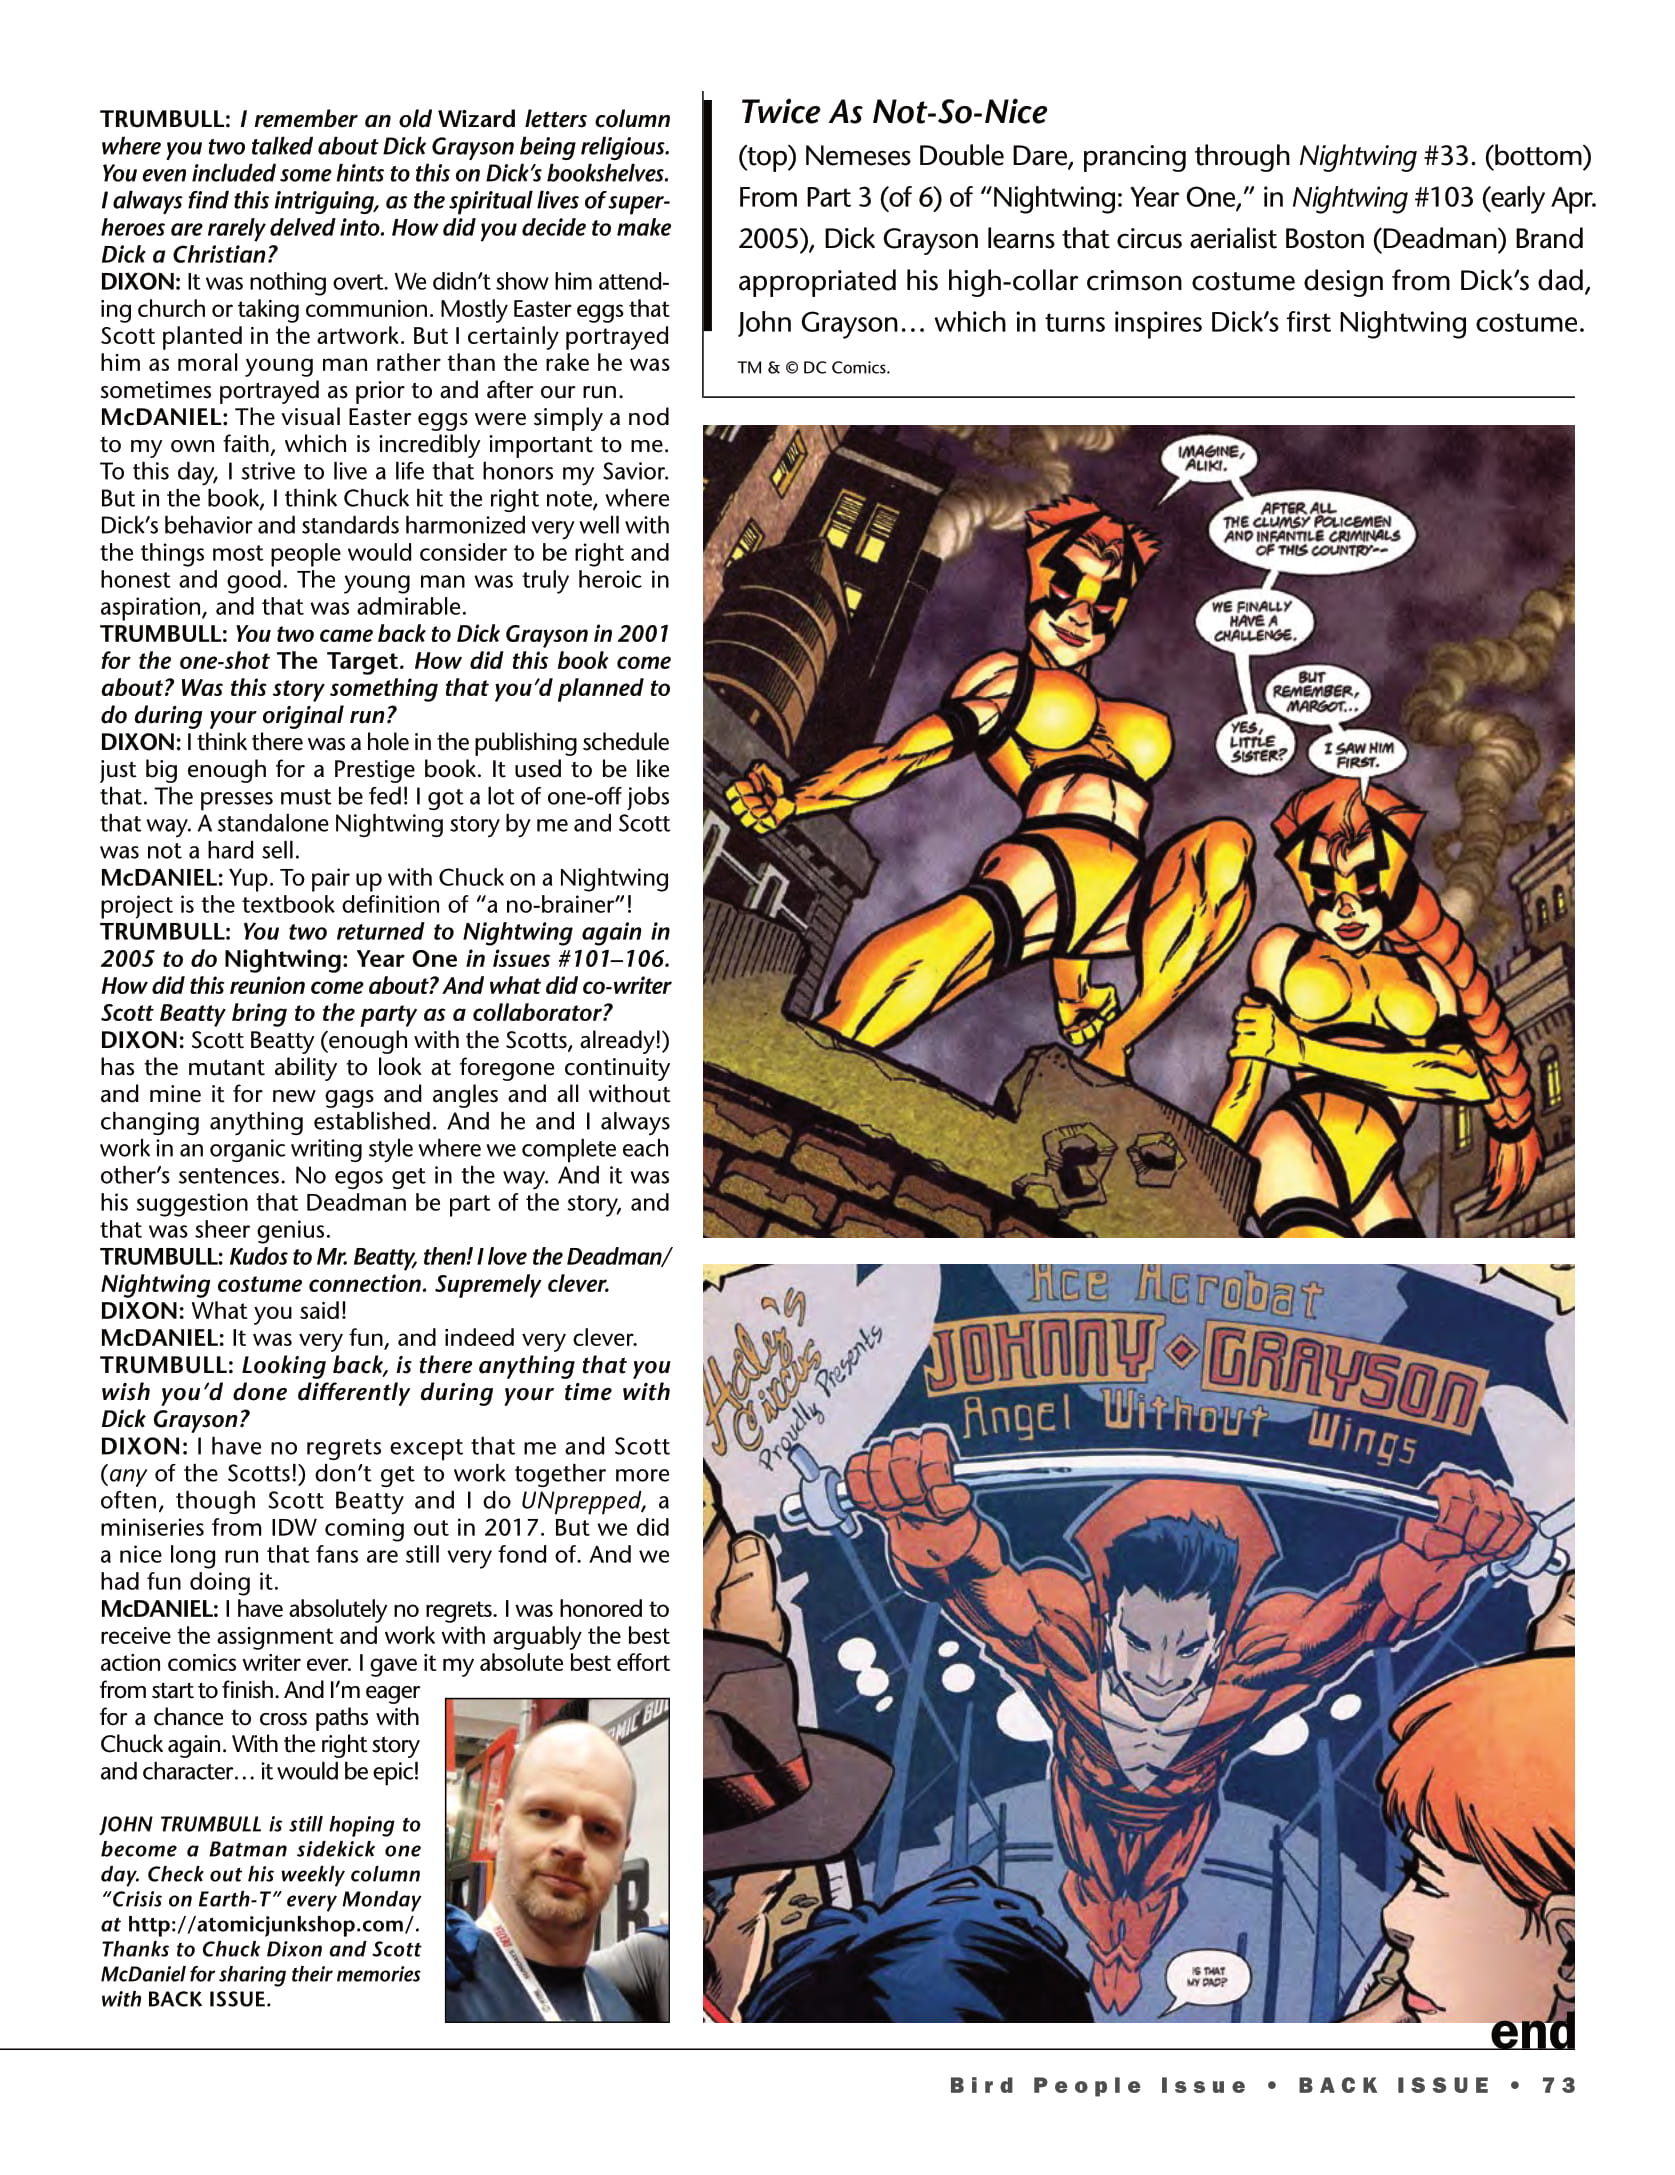 Read online Back Issue comic -  Issue #97 - 75